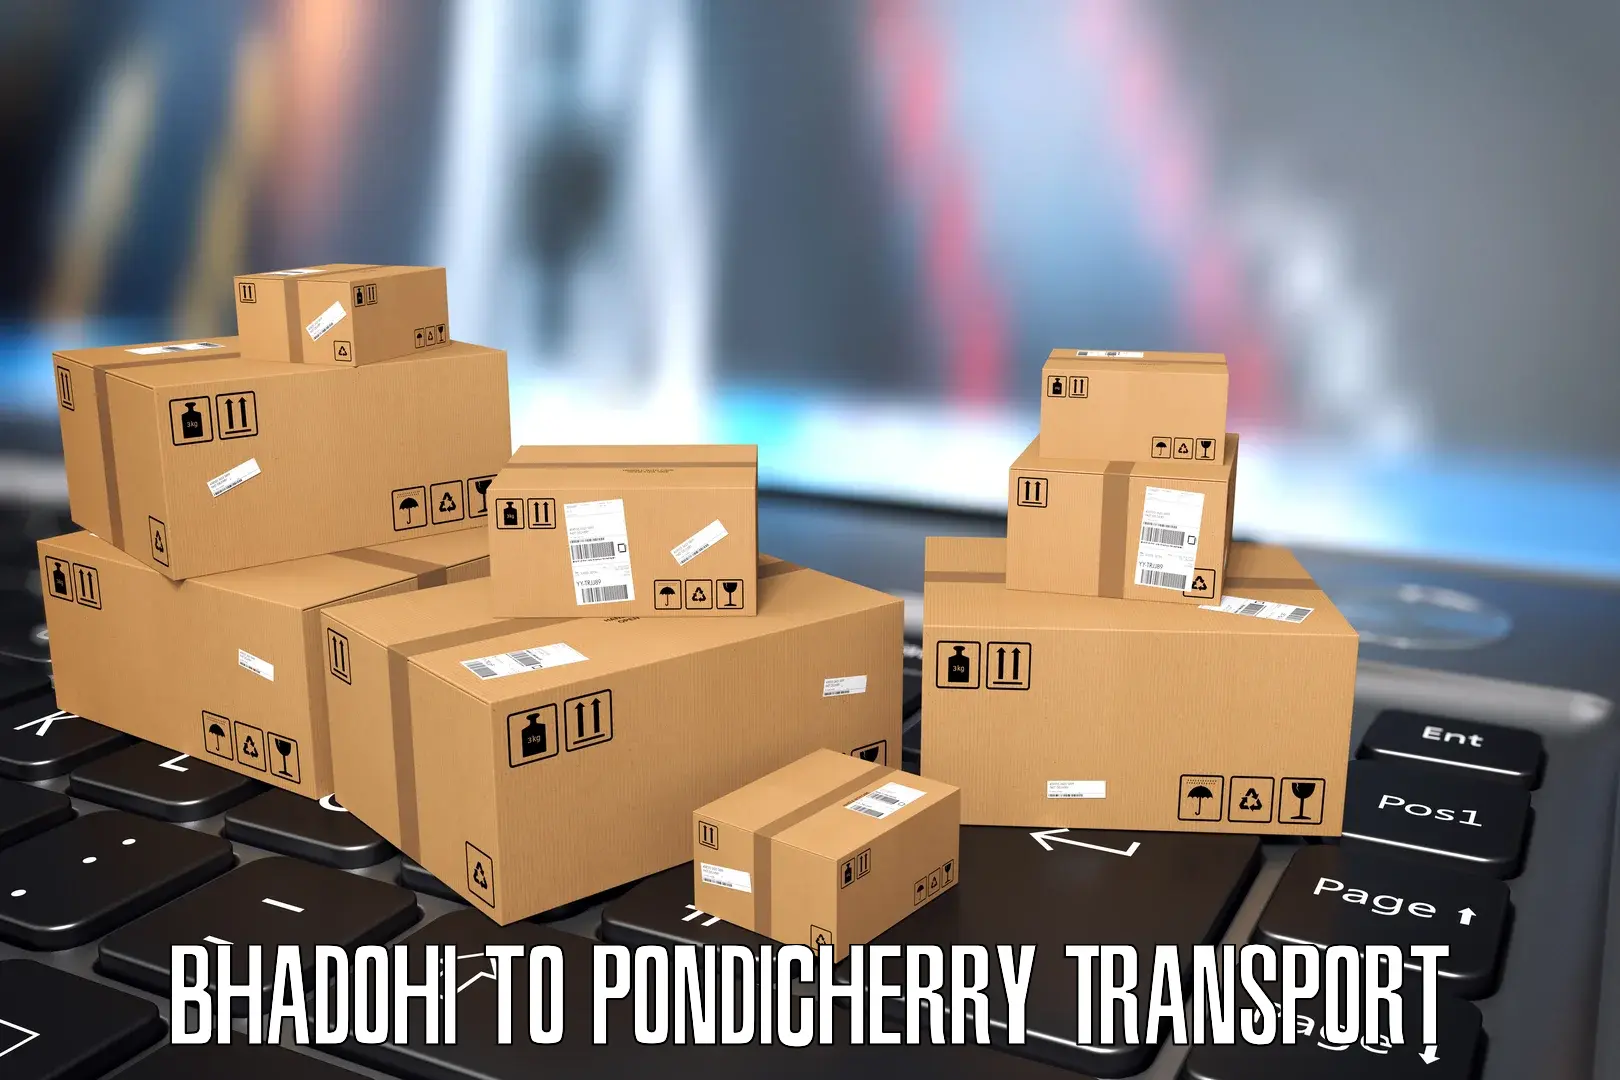 Container transport service Bhadohi to Pondicherry